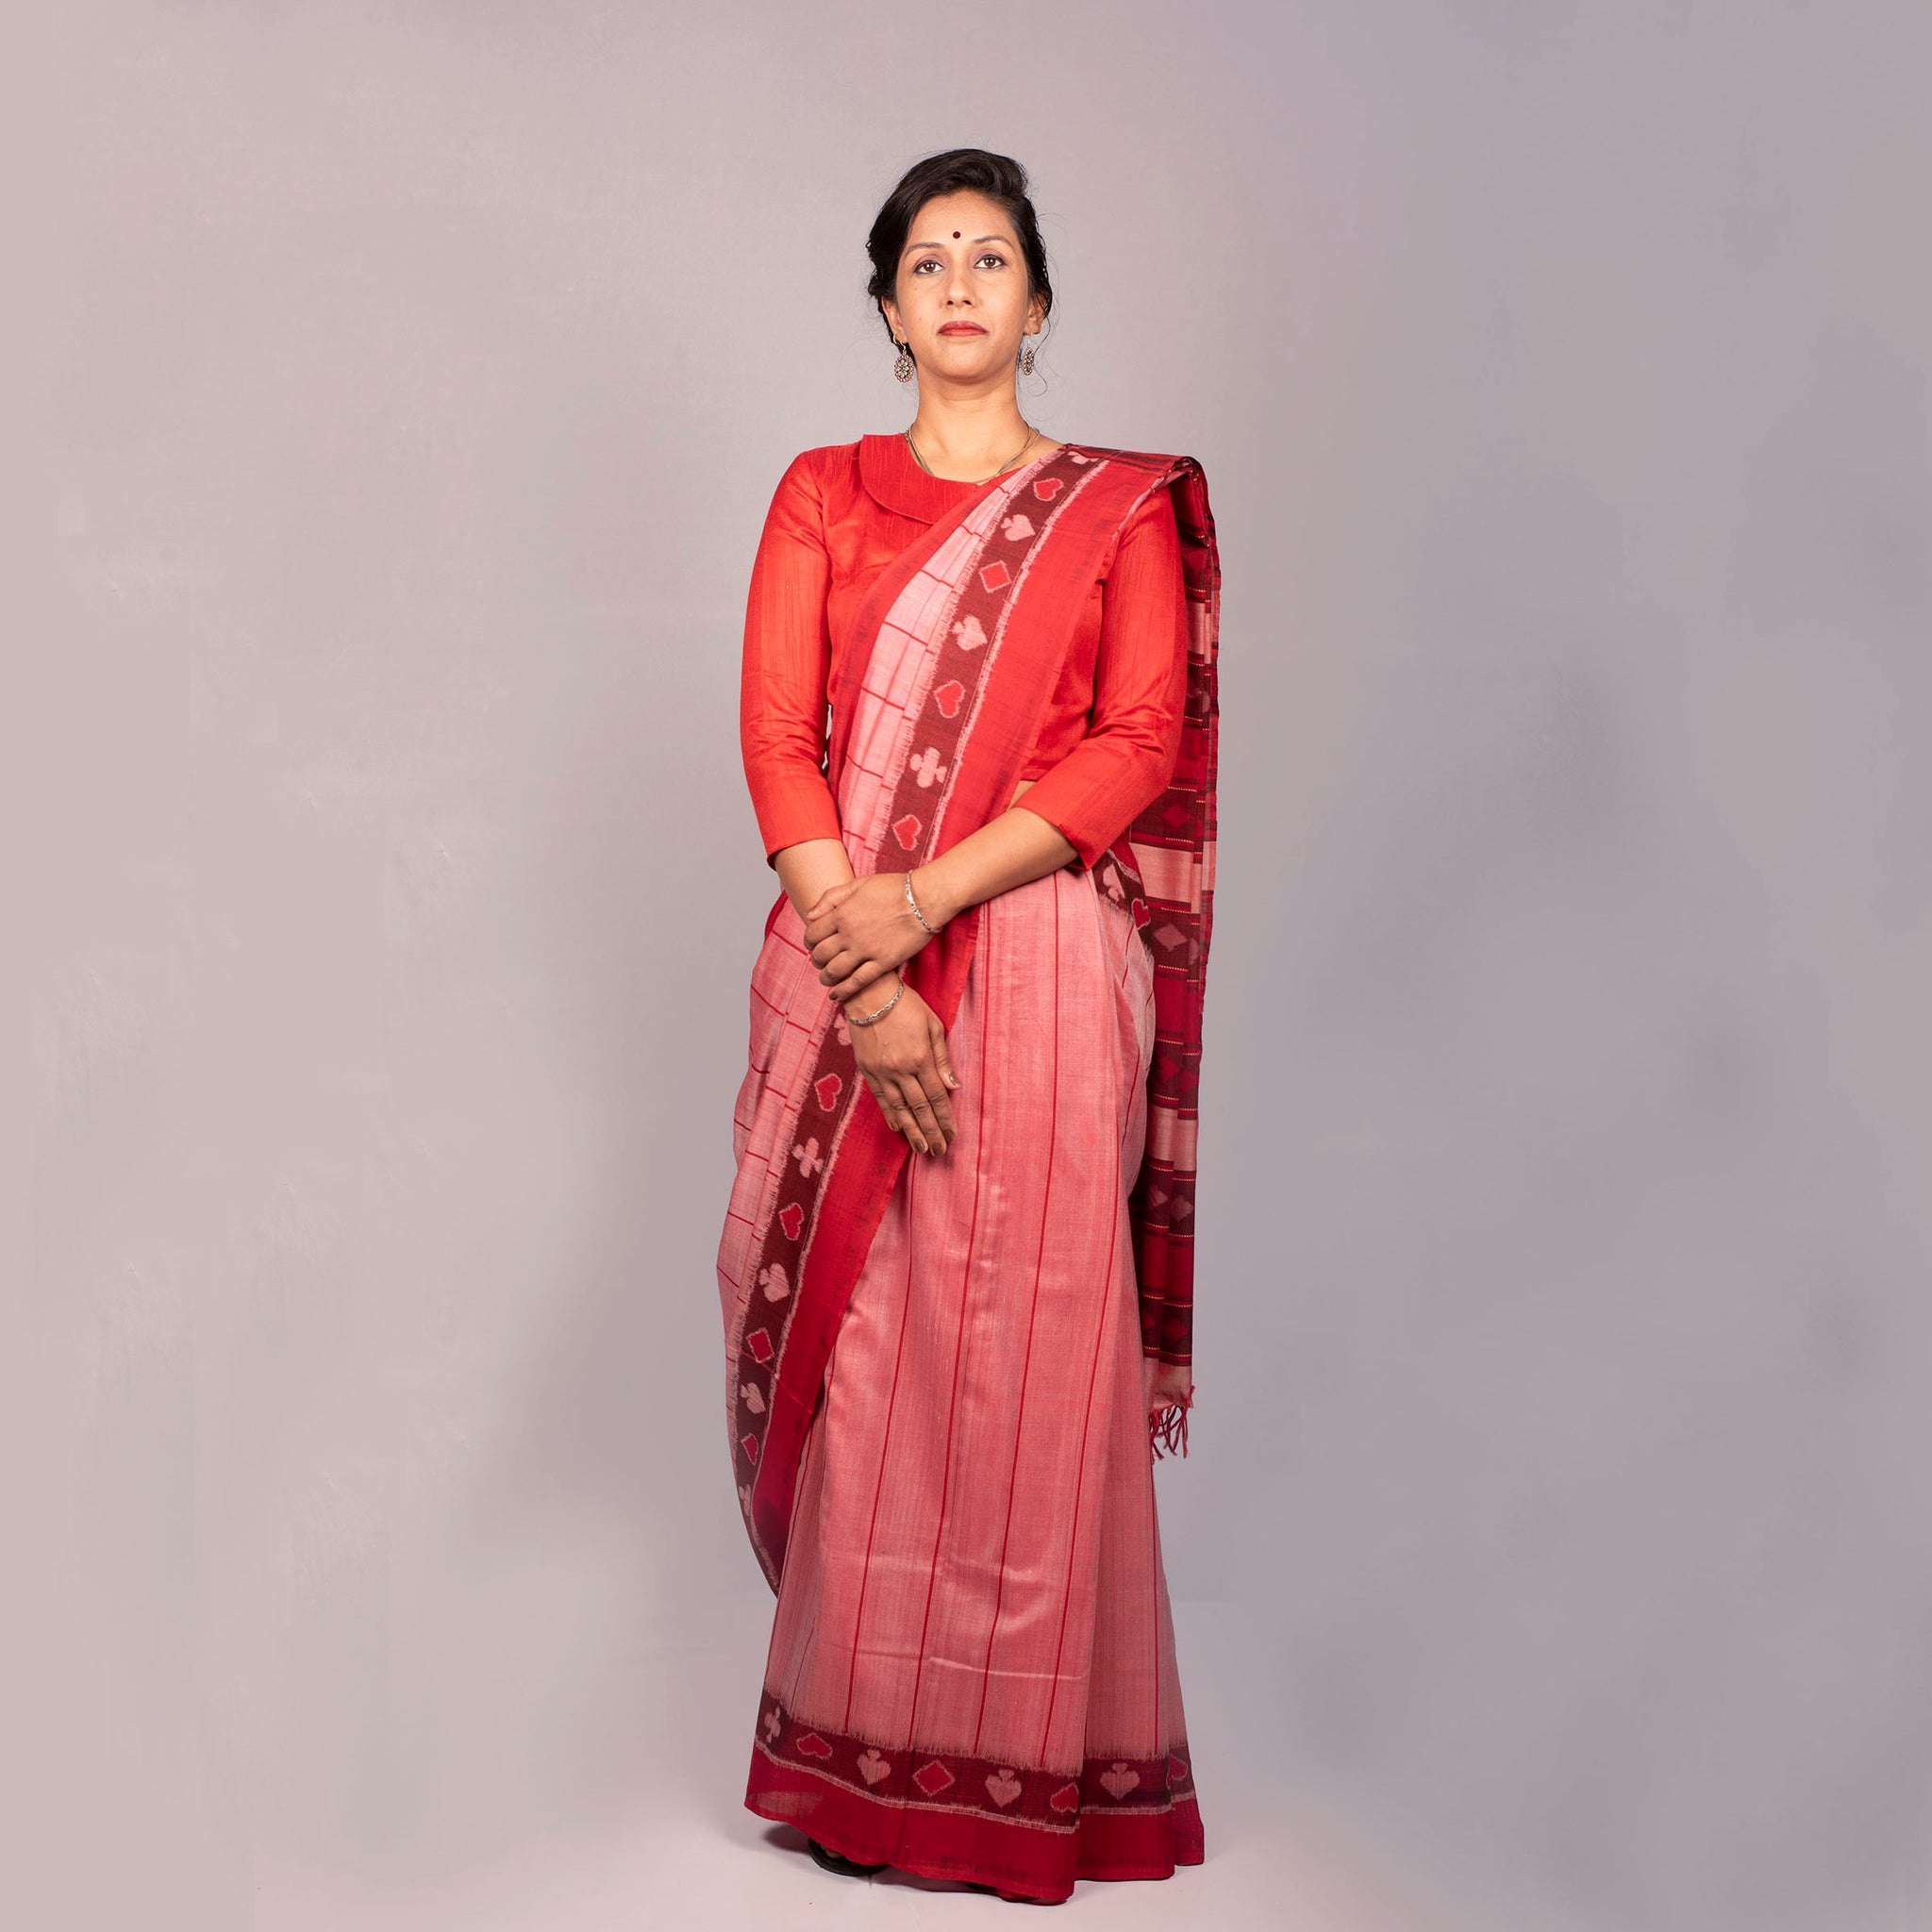 Handwoven pink, red and black ikat saree with taash border and bright red edges